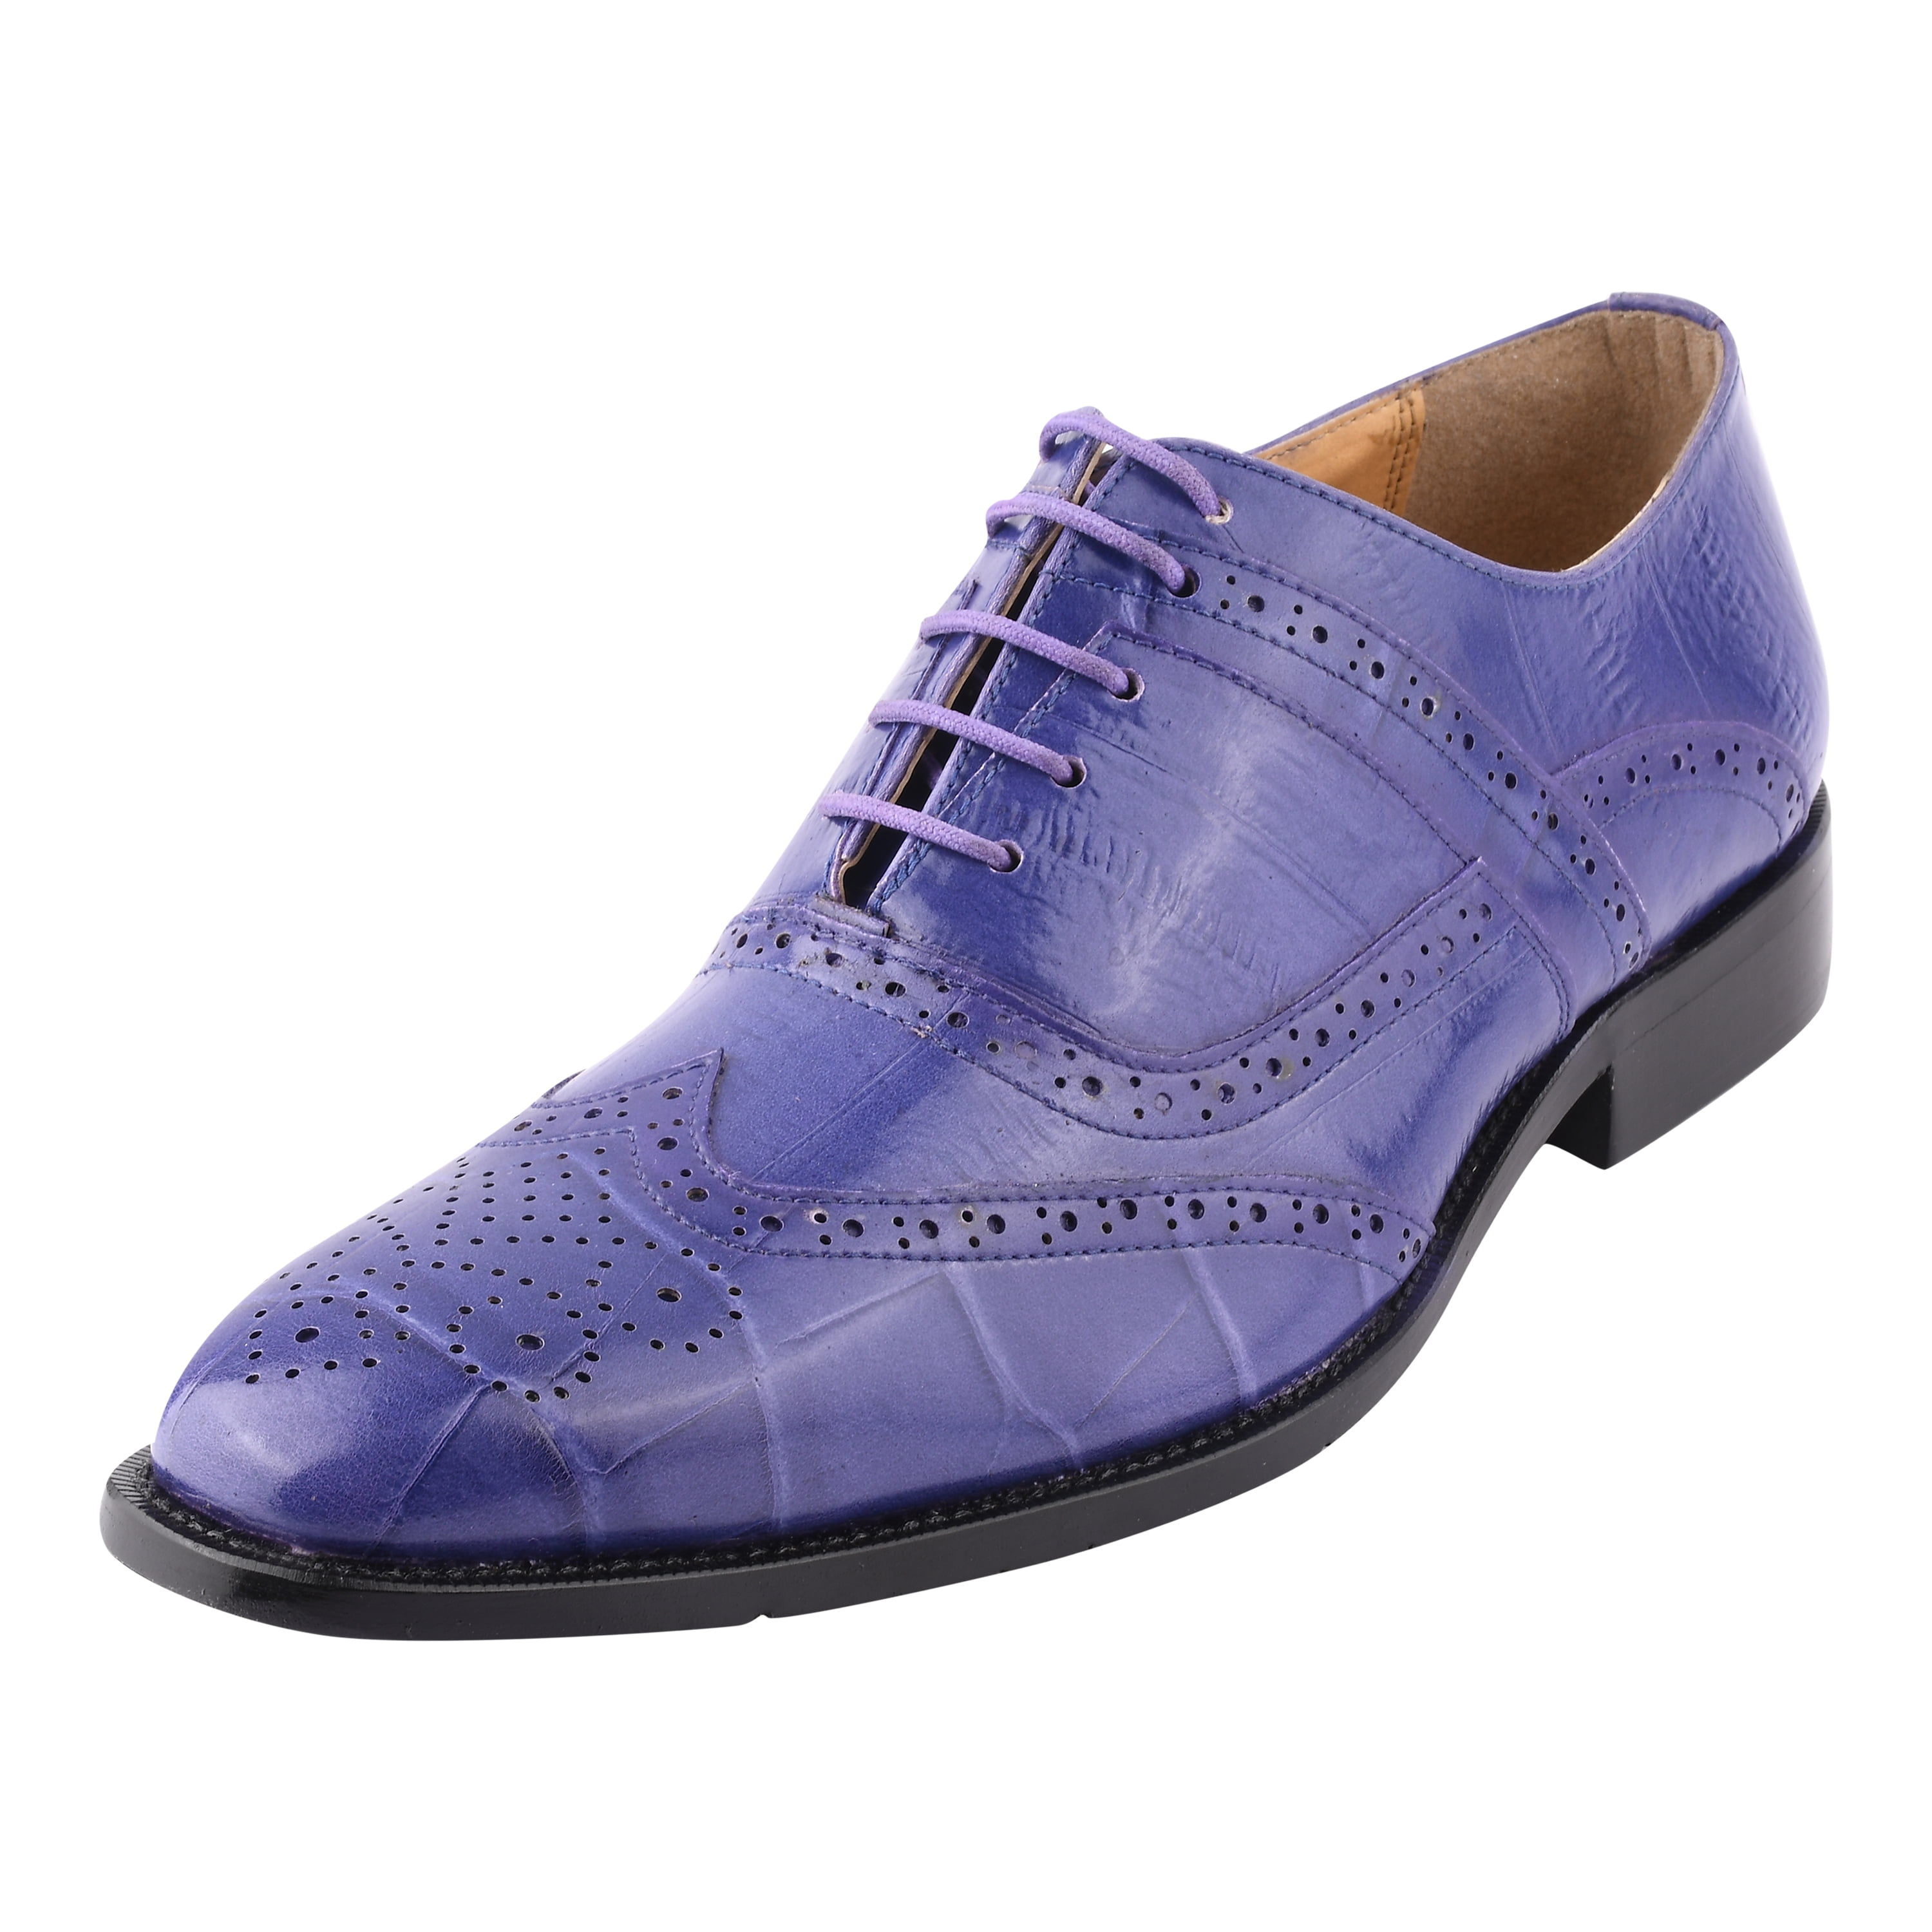 Fiesso Blue Shaded Leather Fashion Brogues Perforated Lace Up Dress Mens Shoe 